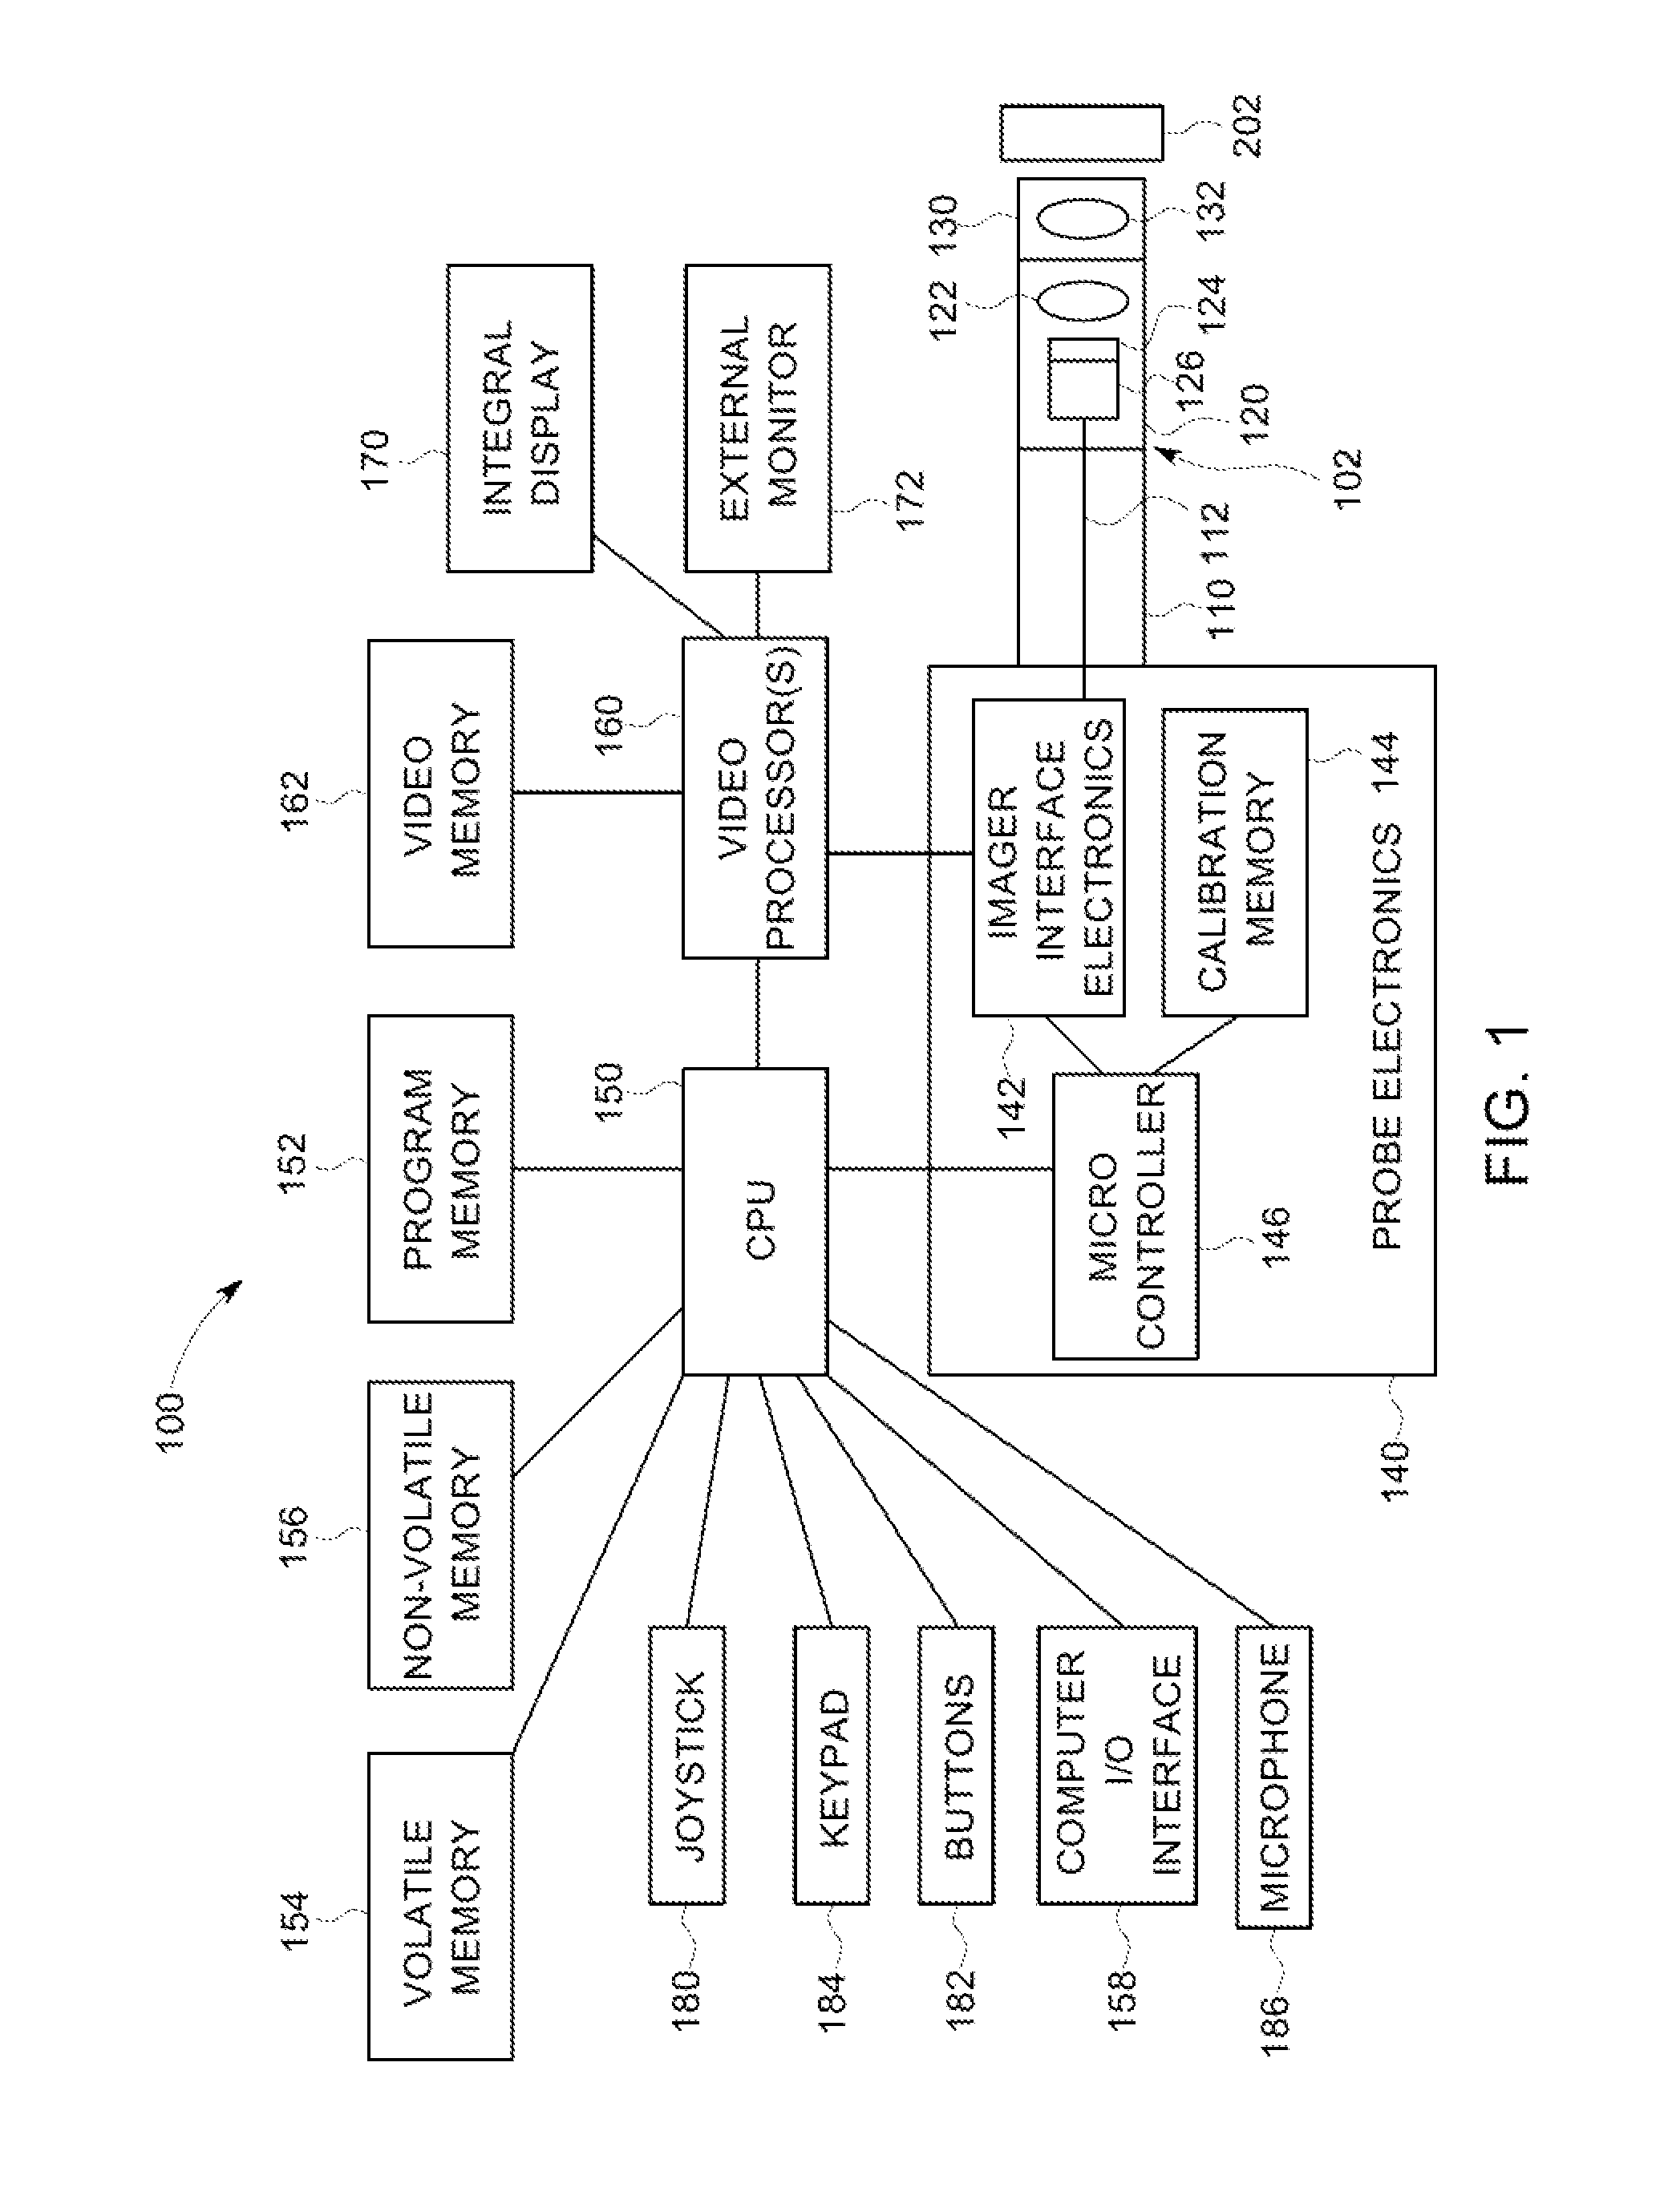 Method and device for automatically identifying a point of interest on the surface of an anomaly